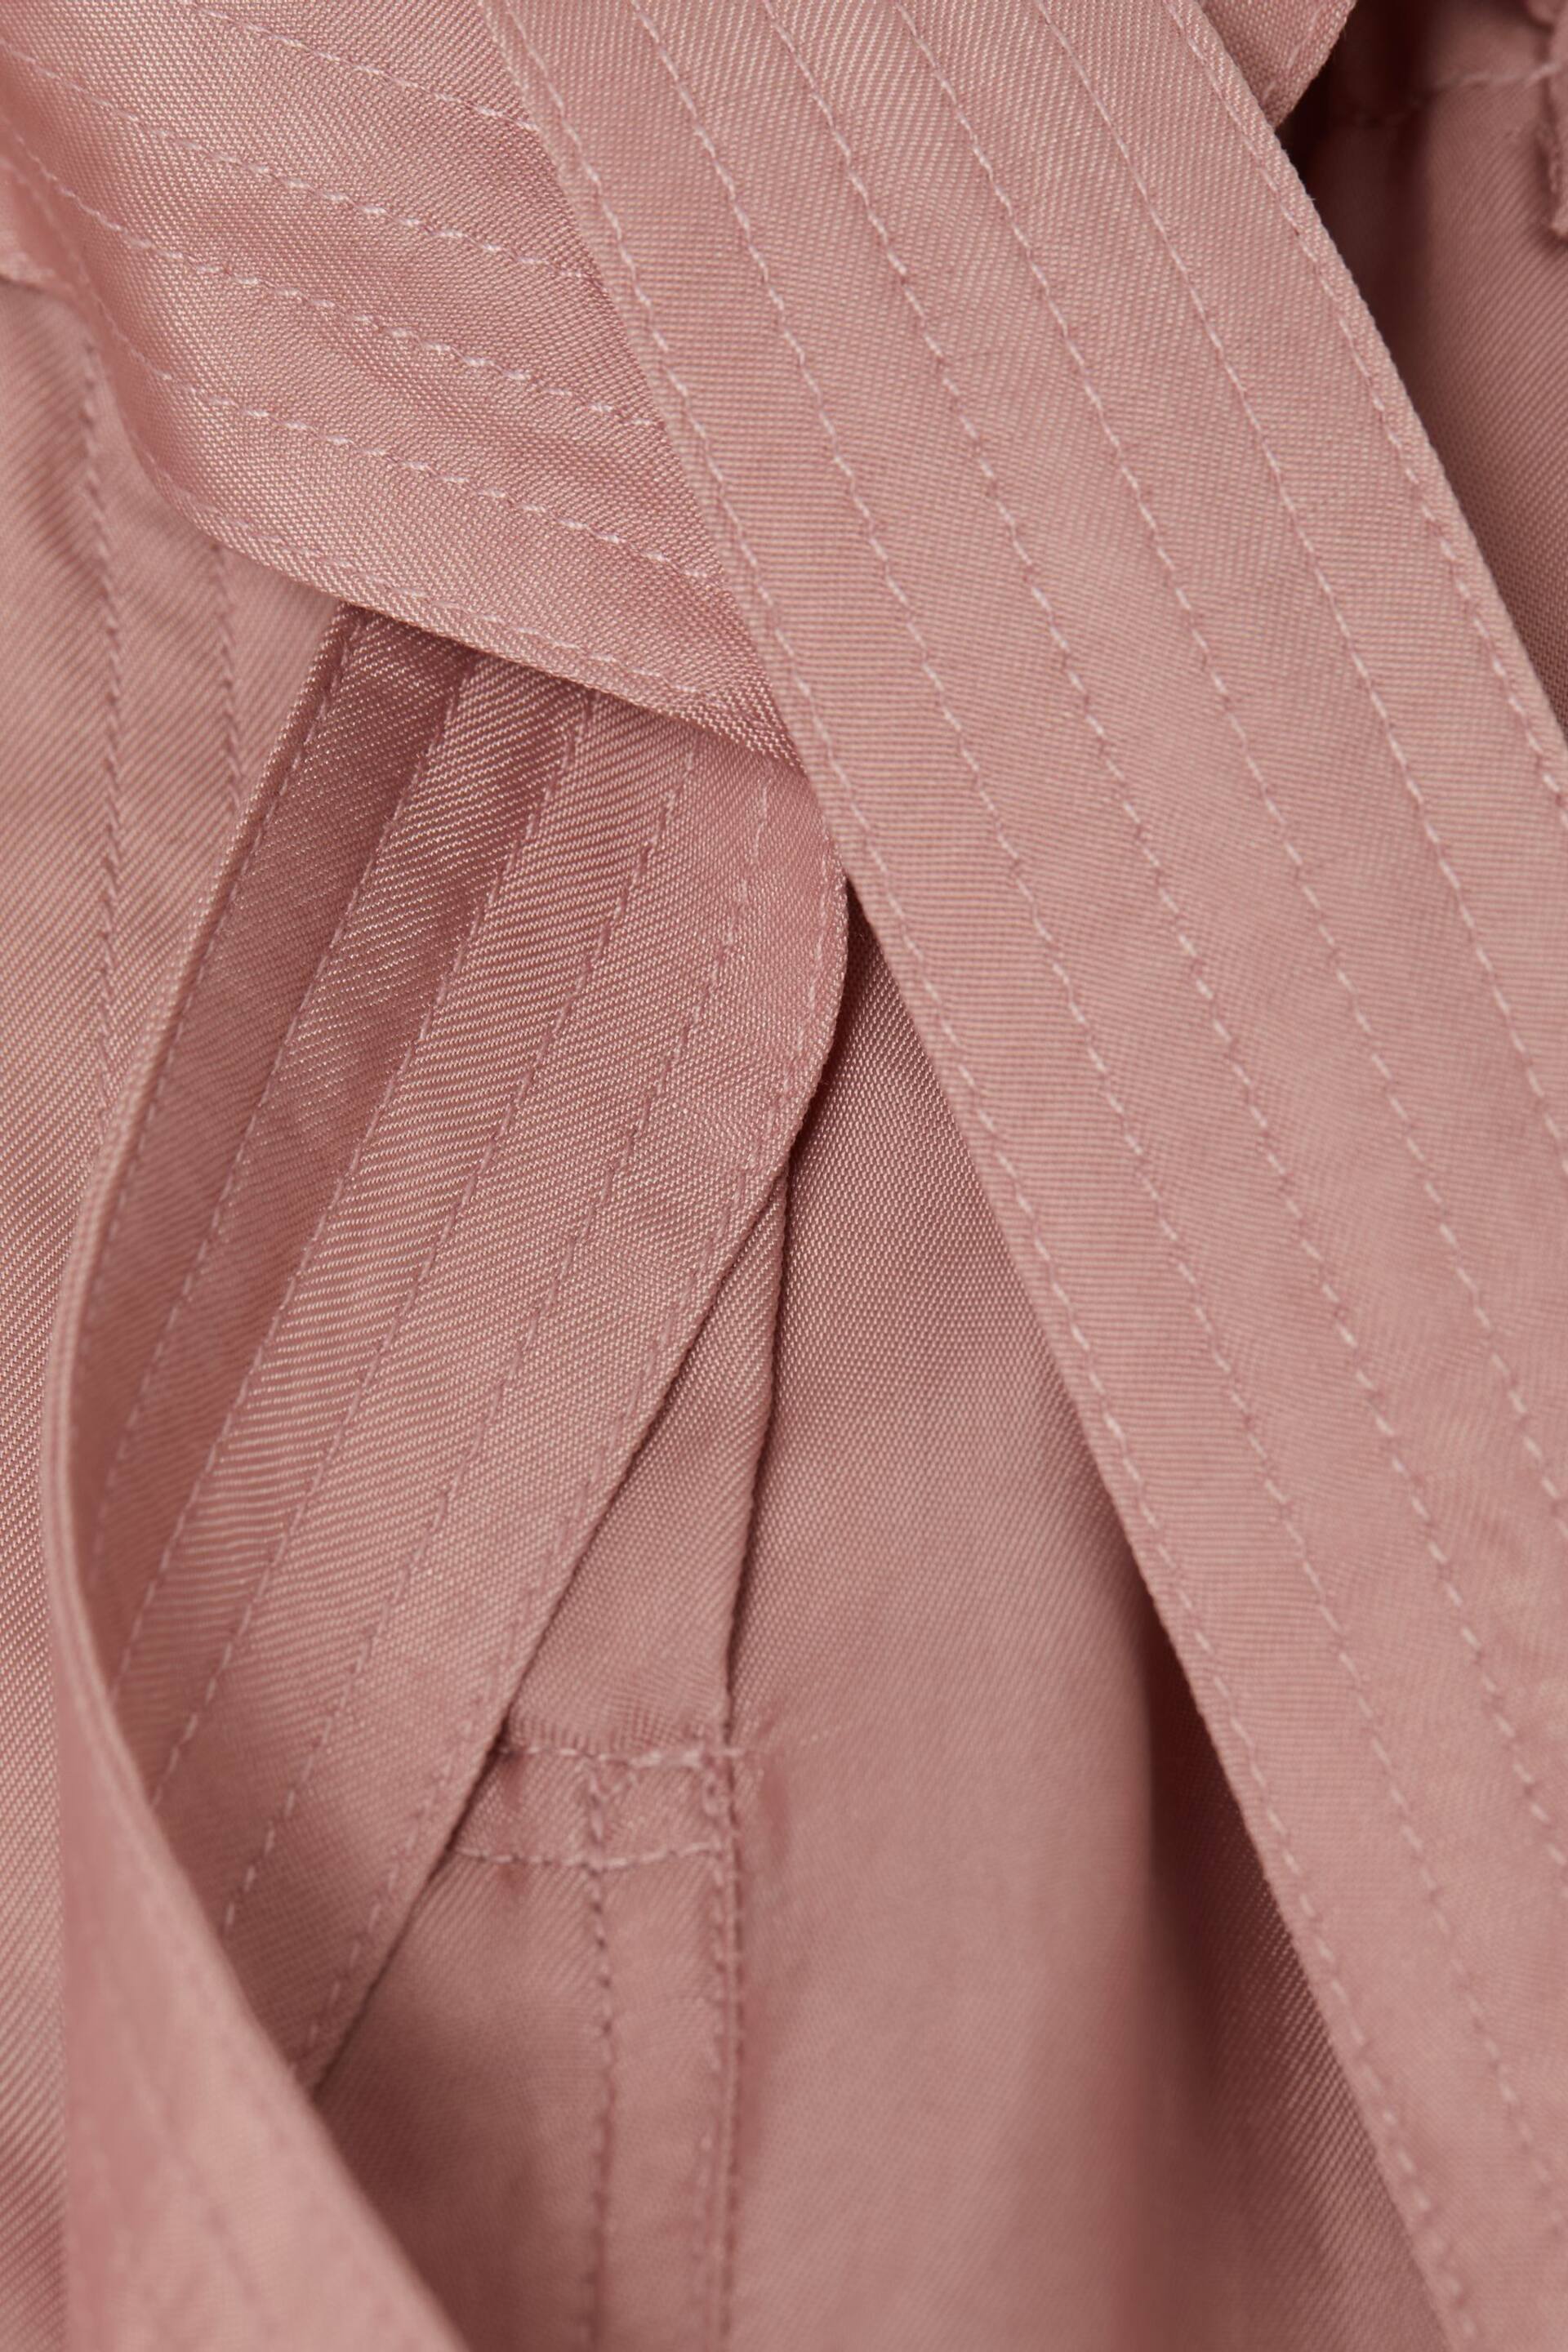 Reiss Pink Joanie Senior Paper Bag Cargo Trousers - Image 5 of 5